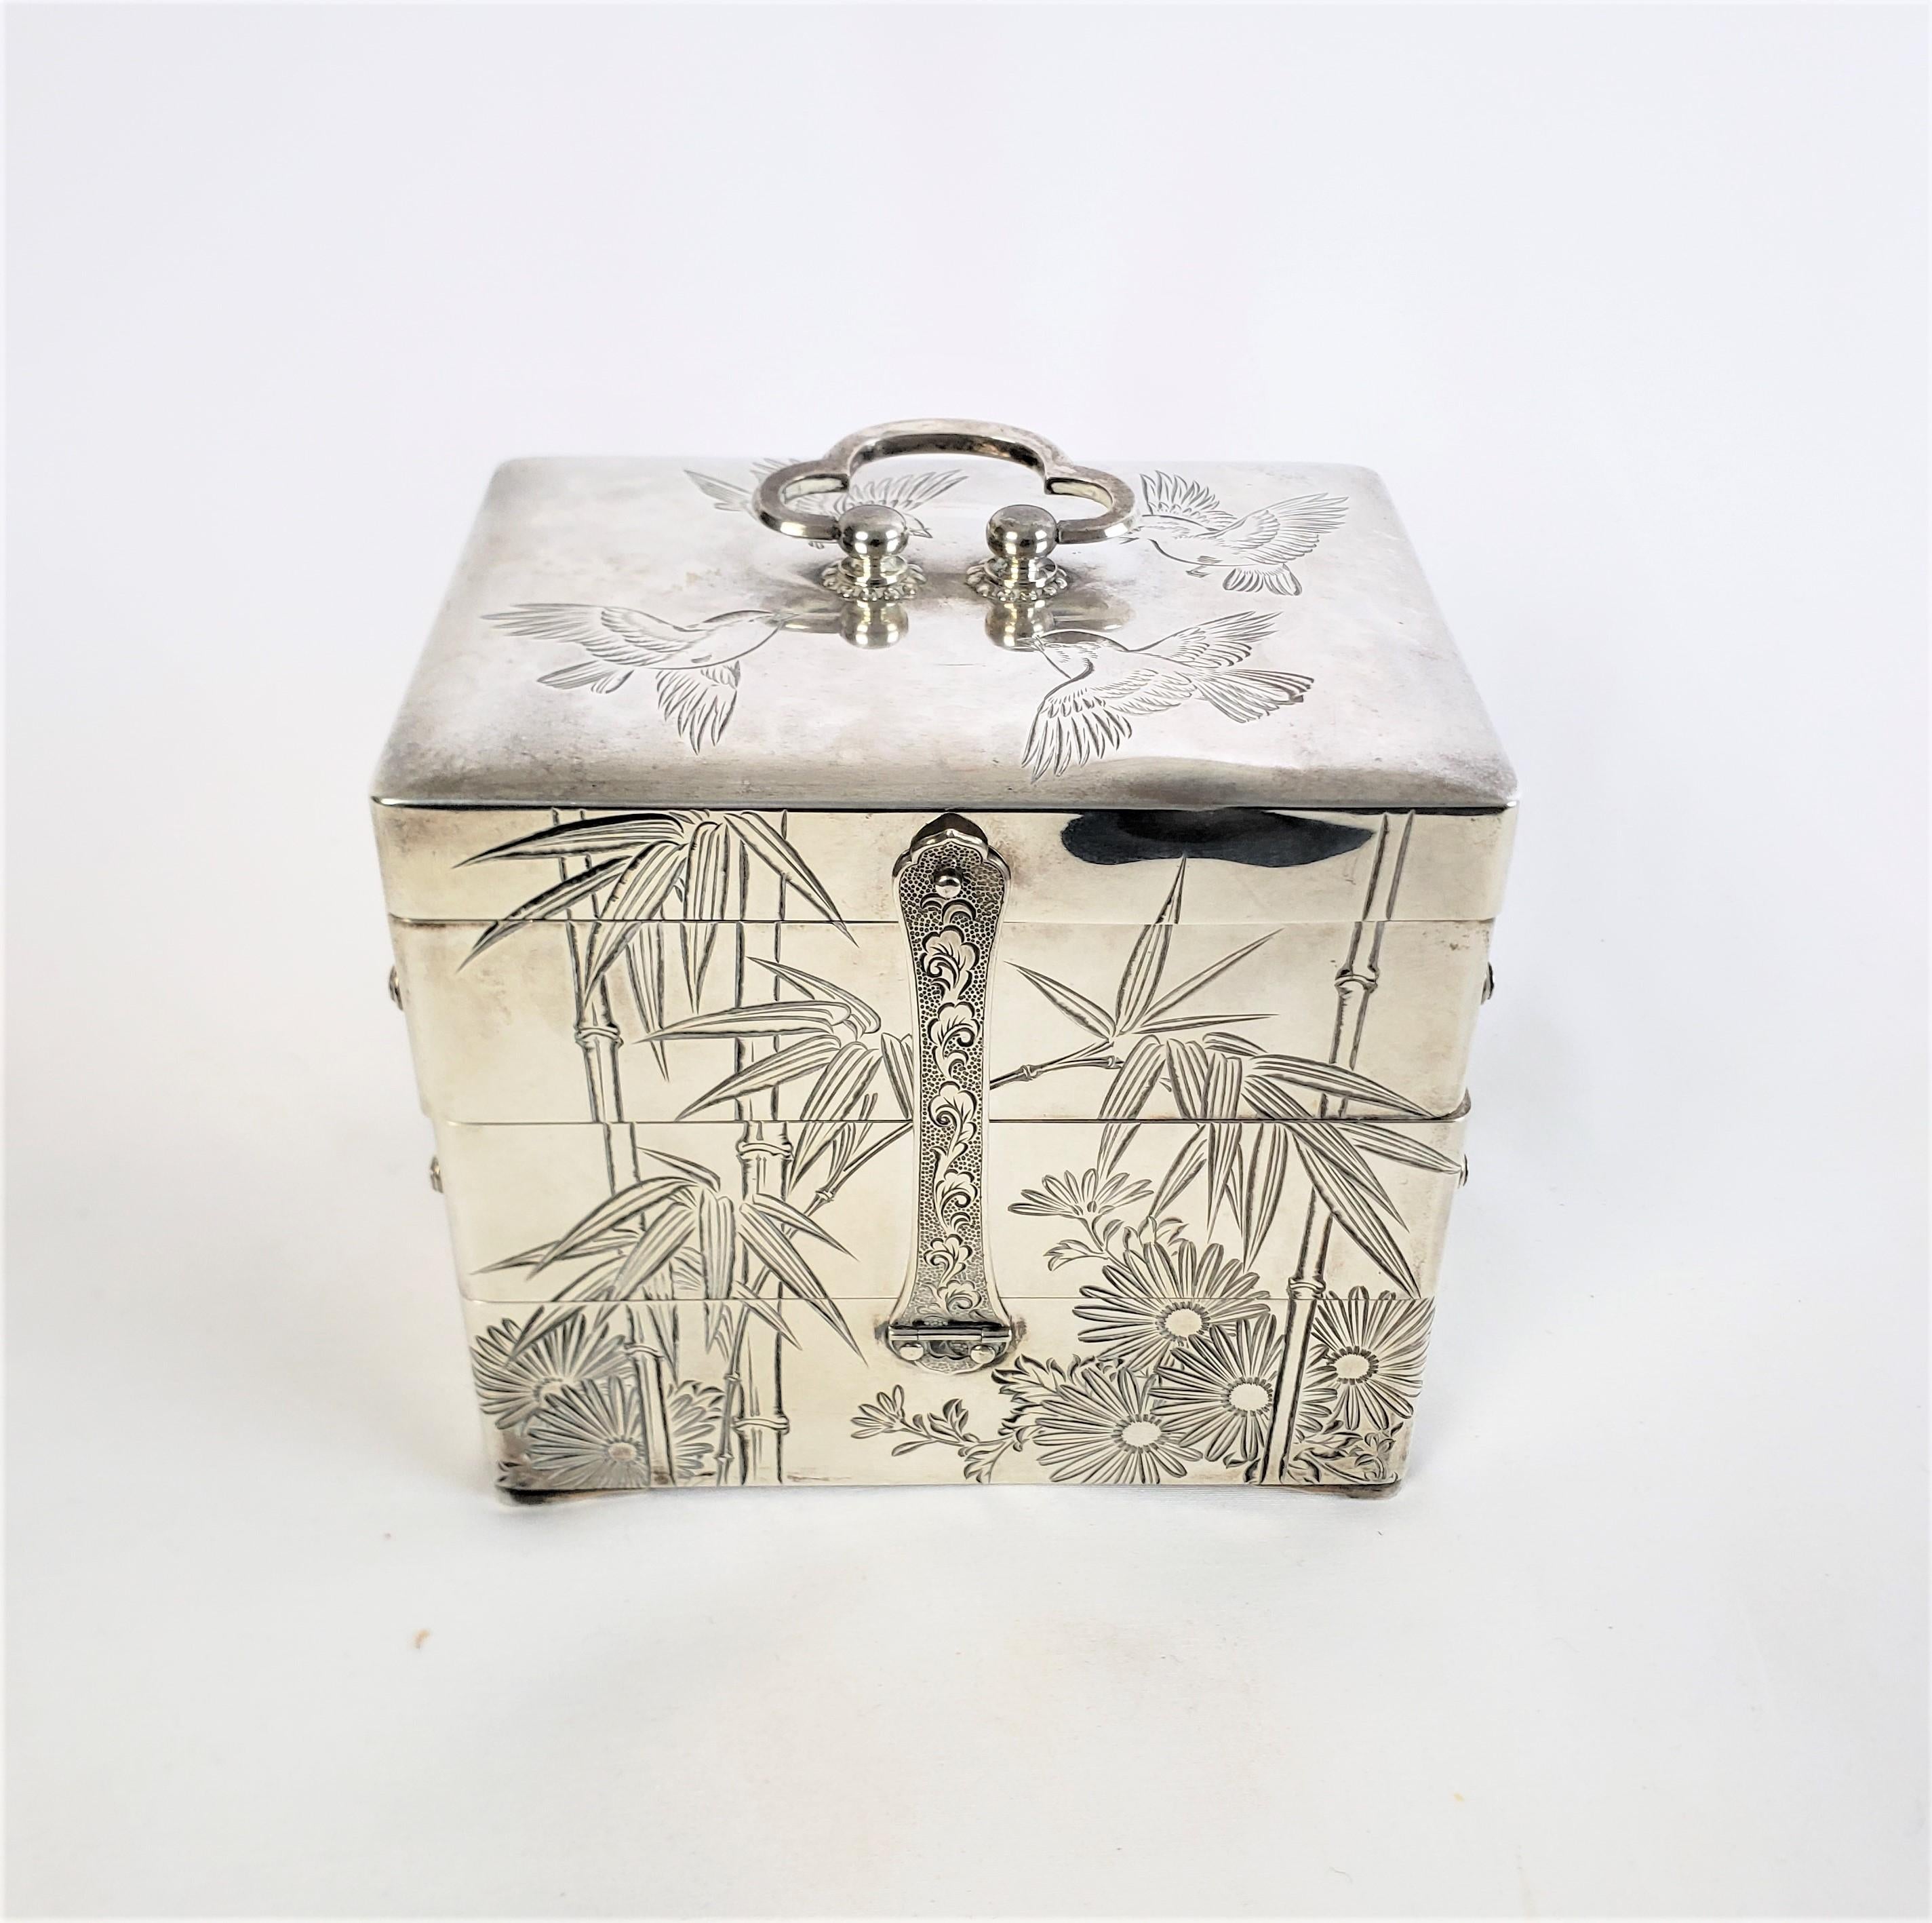 Art Deco Antique Japanese Silver Accordian Jewelry Box with Engraved Bamboo & Flowers